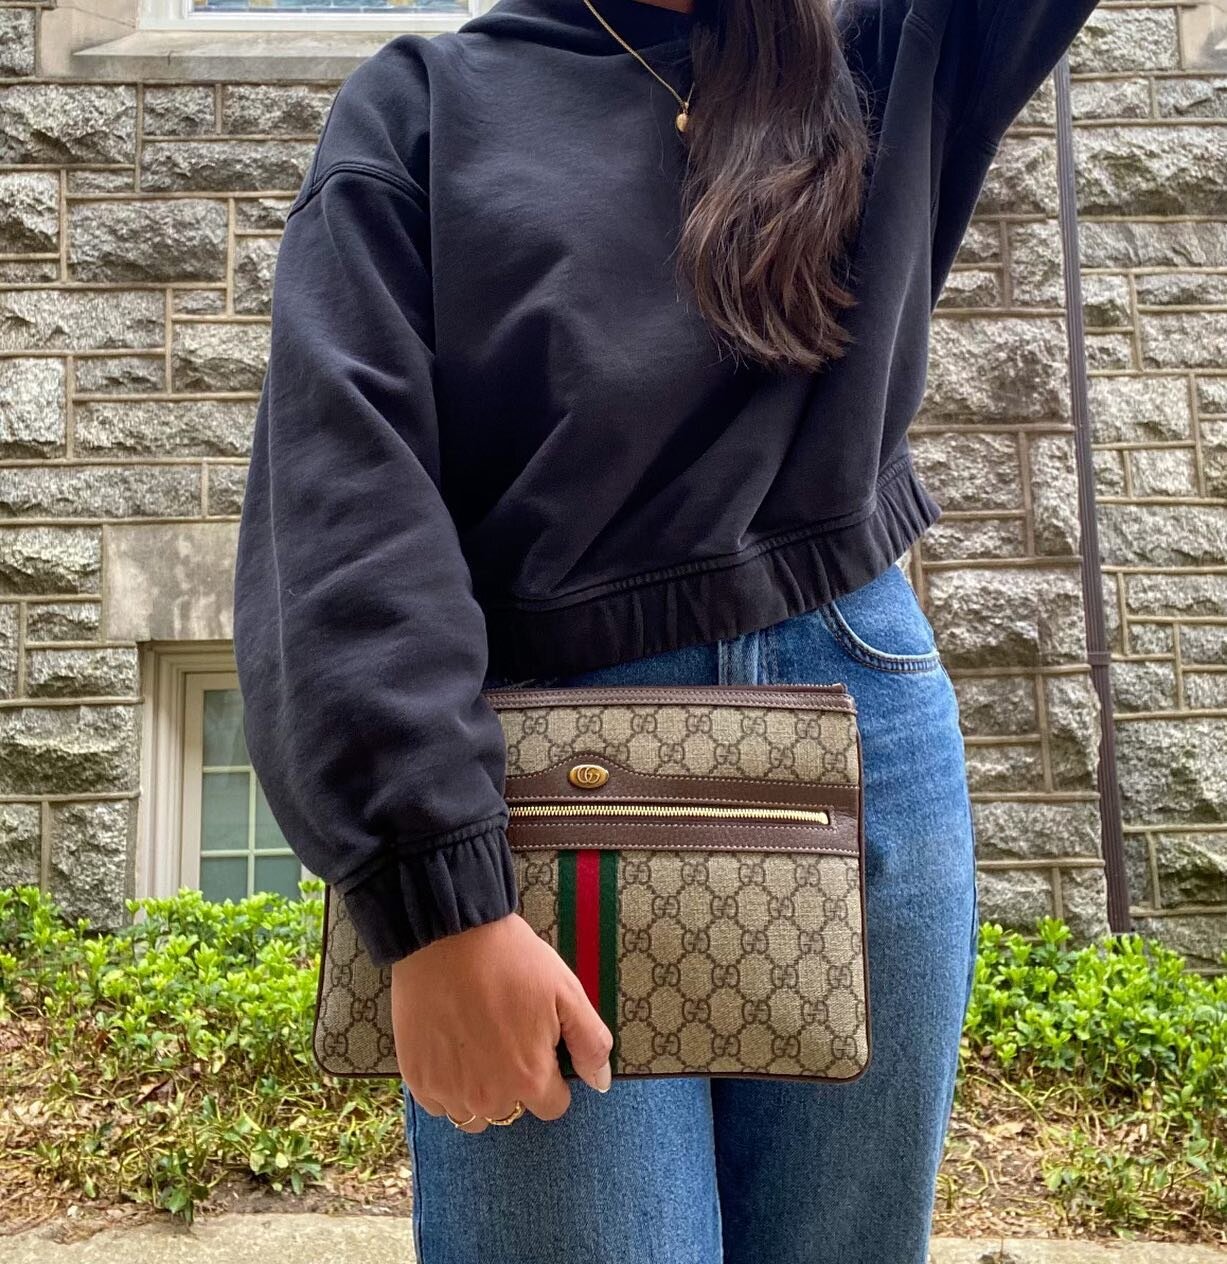 New in @greenestreetprinceton!✨ This stunning Gucci GG Supreme Ophidia clutch, available for $700.95
⠀⠀⠀⠀⠀⠀⠀⠀⠀
For Availability call or email the Princeton store!
📞609-924-1997
📧princeton@greenestreet.com